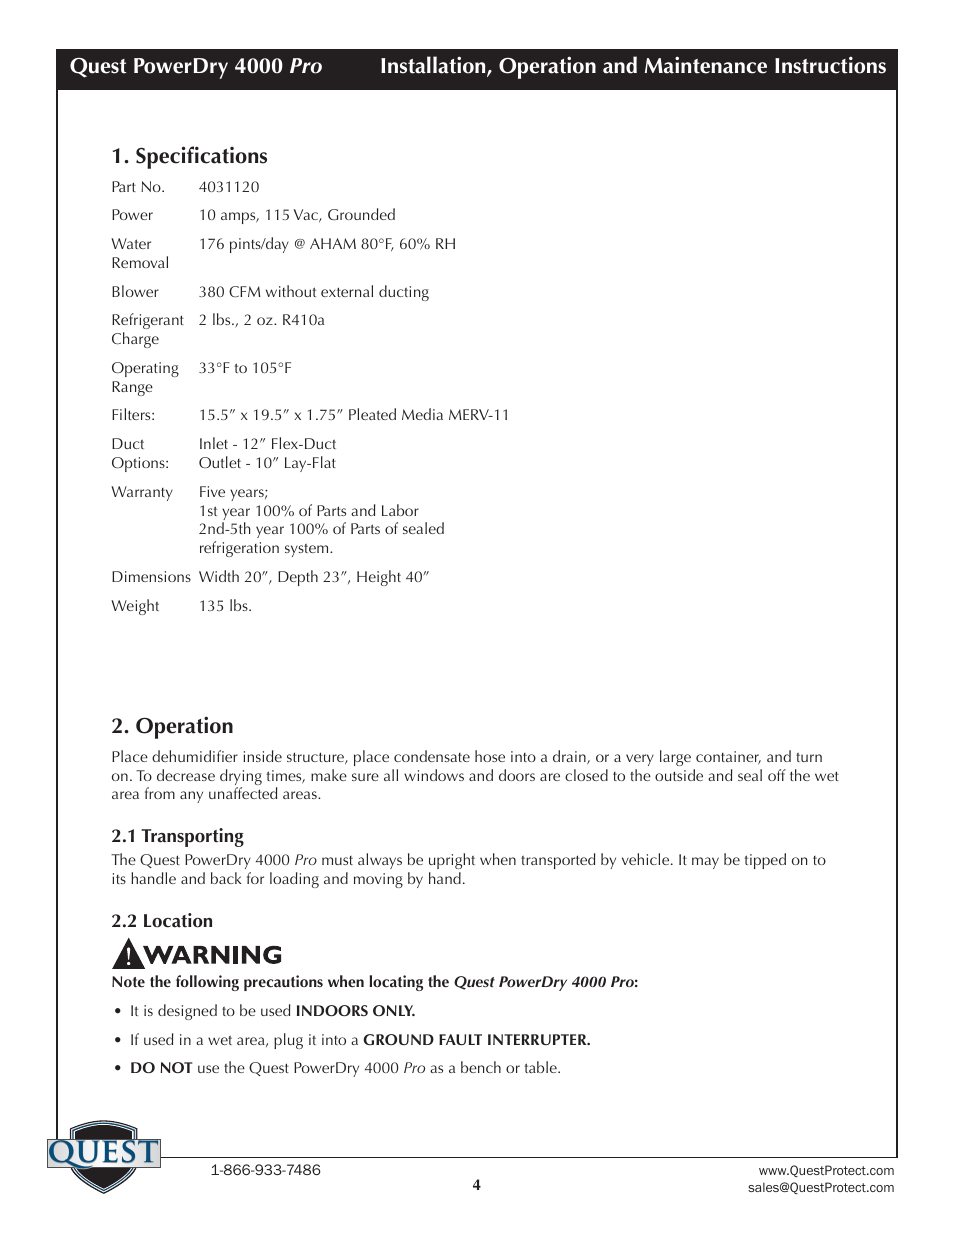 Quest, Specifications, Operation | Sunlight Supply Quest PowerDry 4000 Pro Dehumidifier User Manual | Page 4 / 14